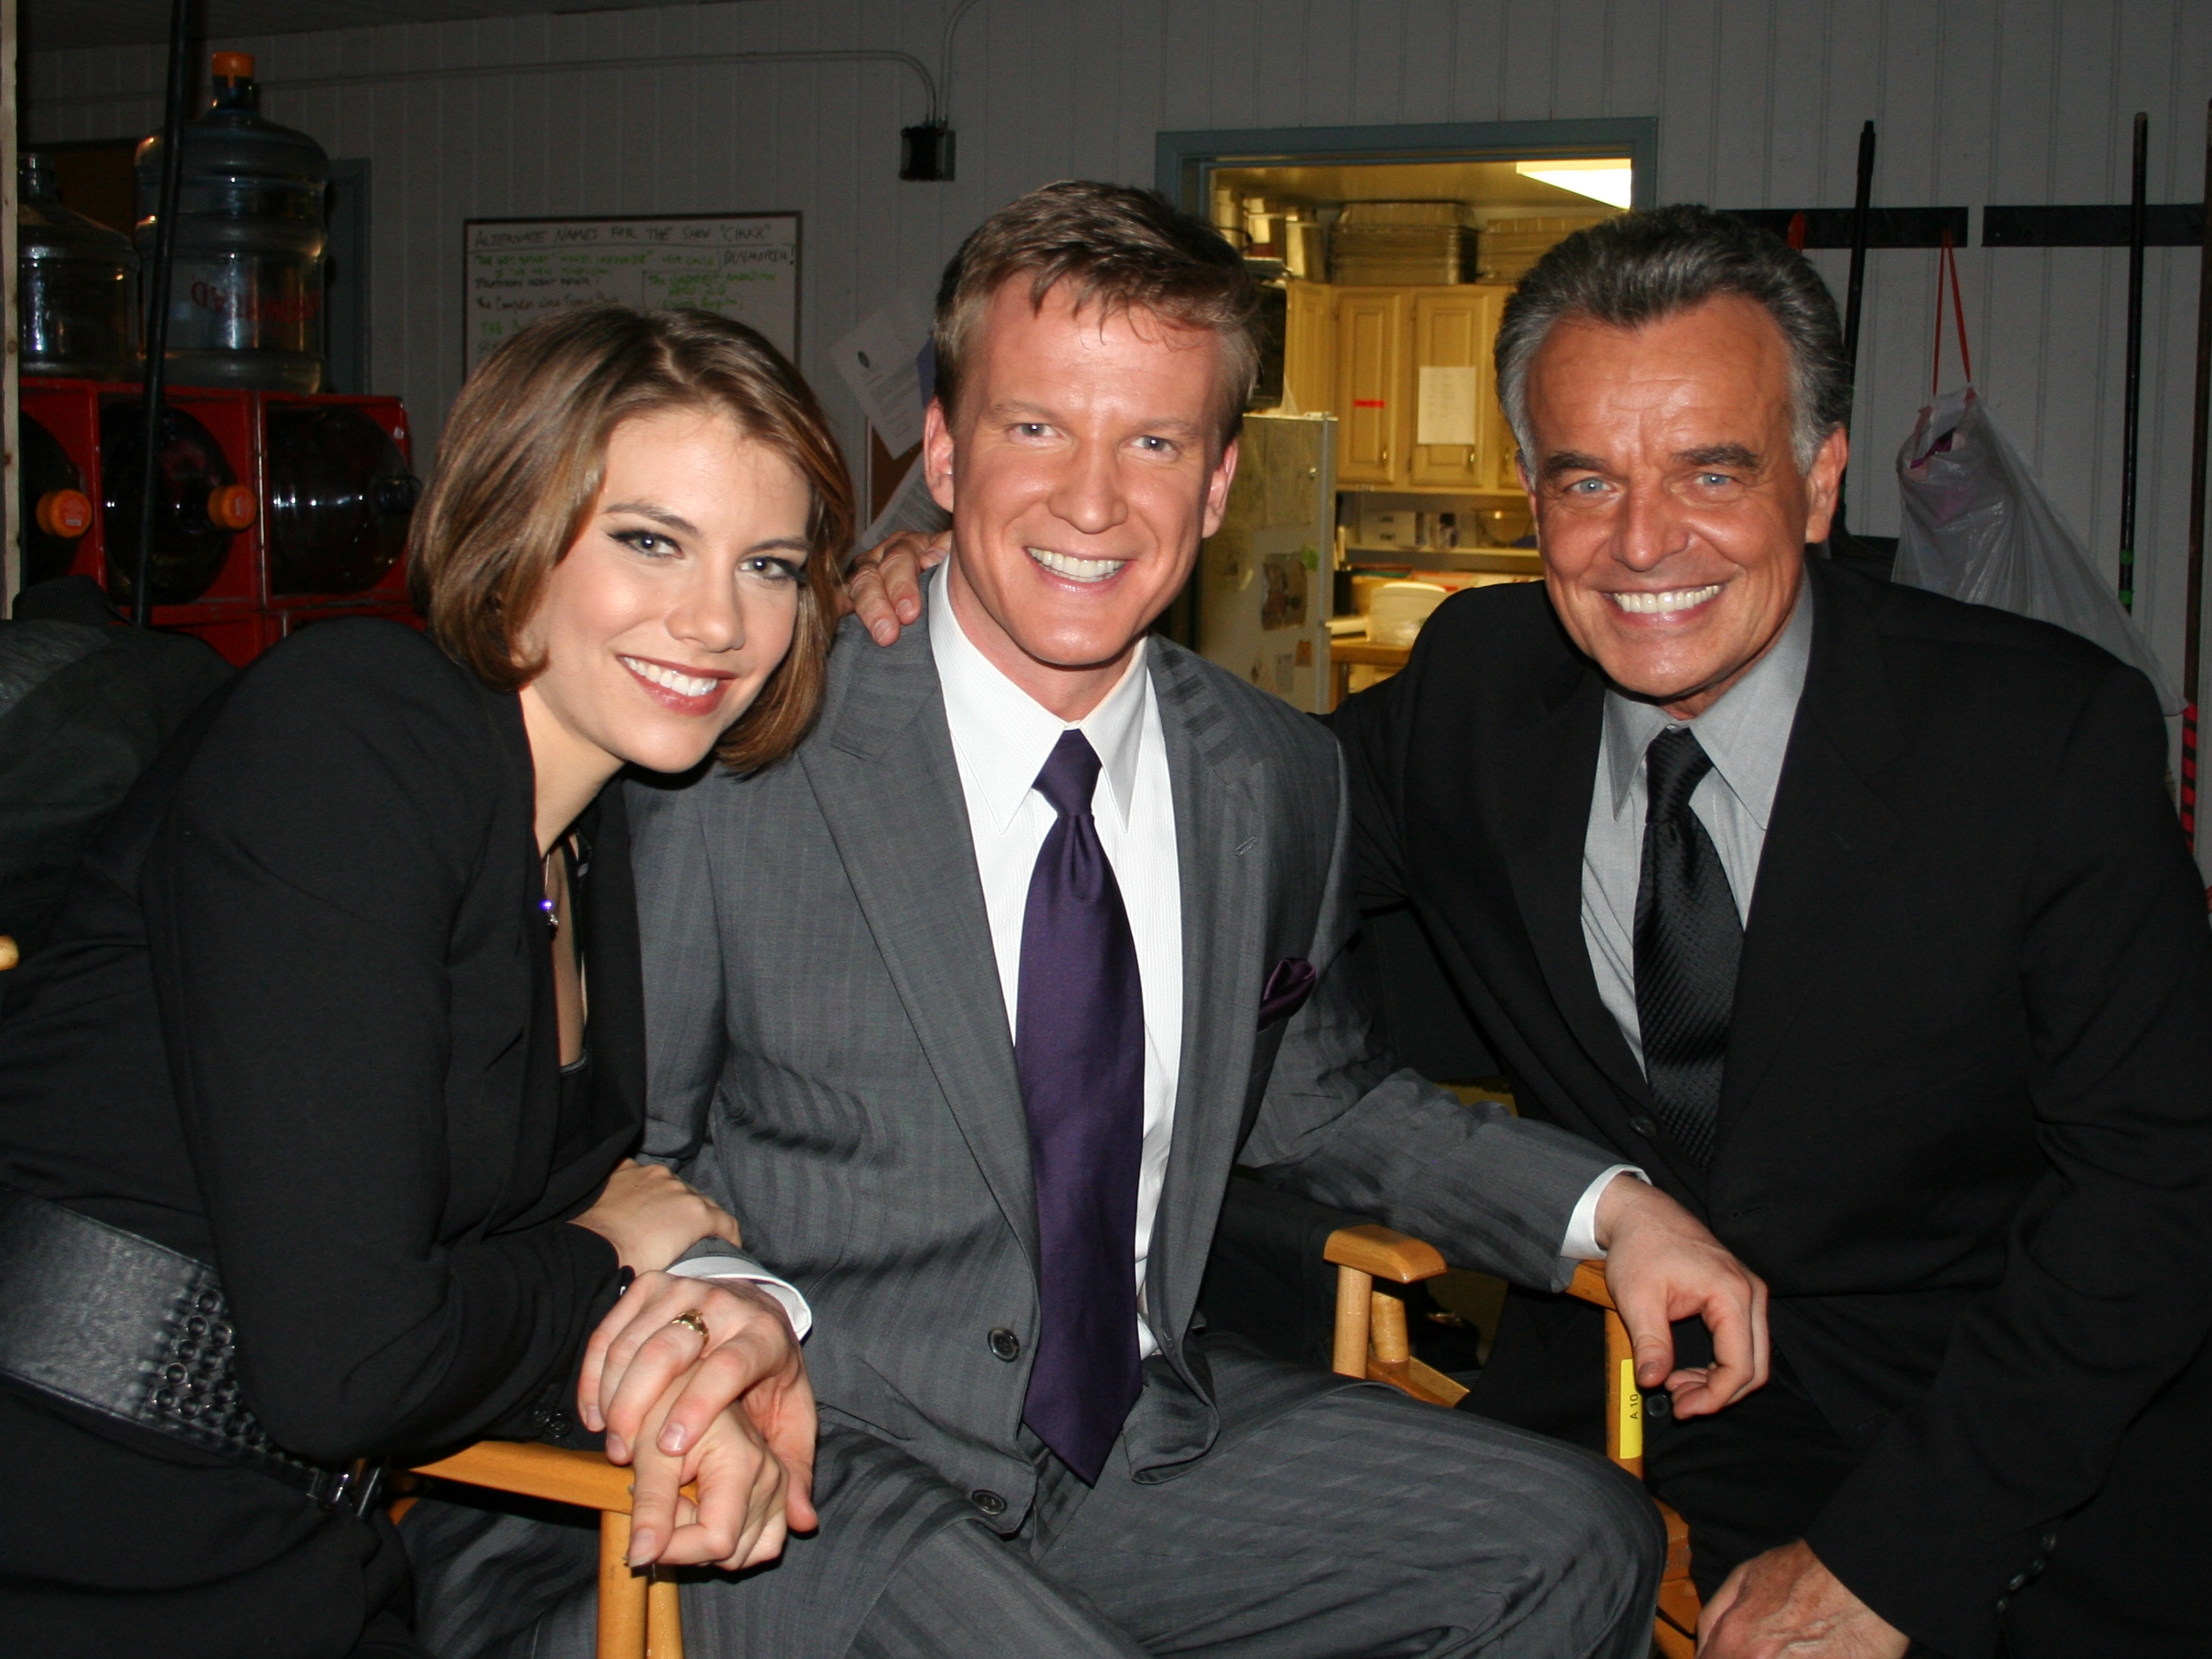 On set of CHUCK: Lauren Cohan, Graham Clarke and Ray Wise